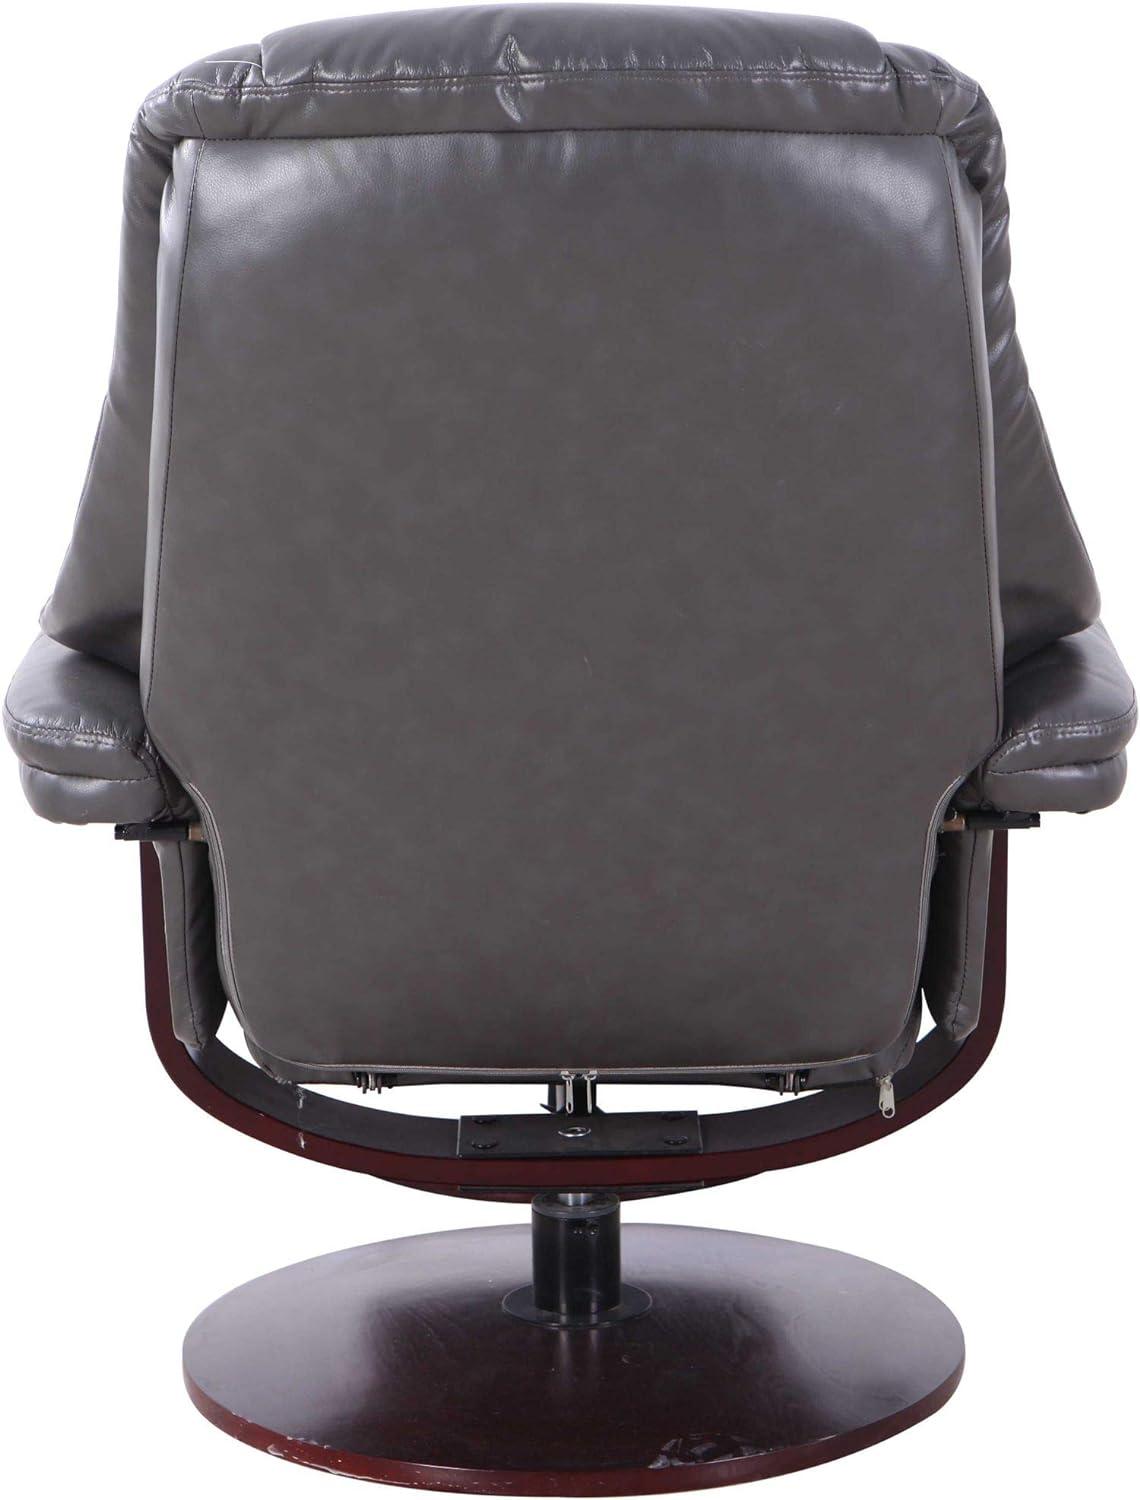 Transitional Charcoal Leather Swivel Recliner with Wood Accents